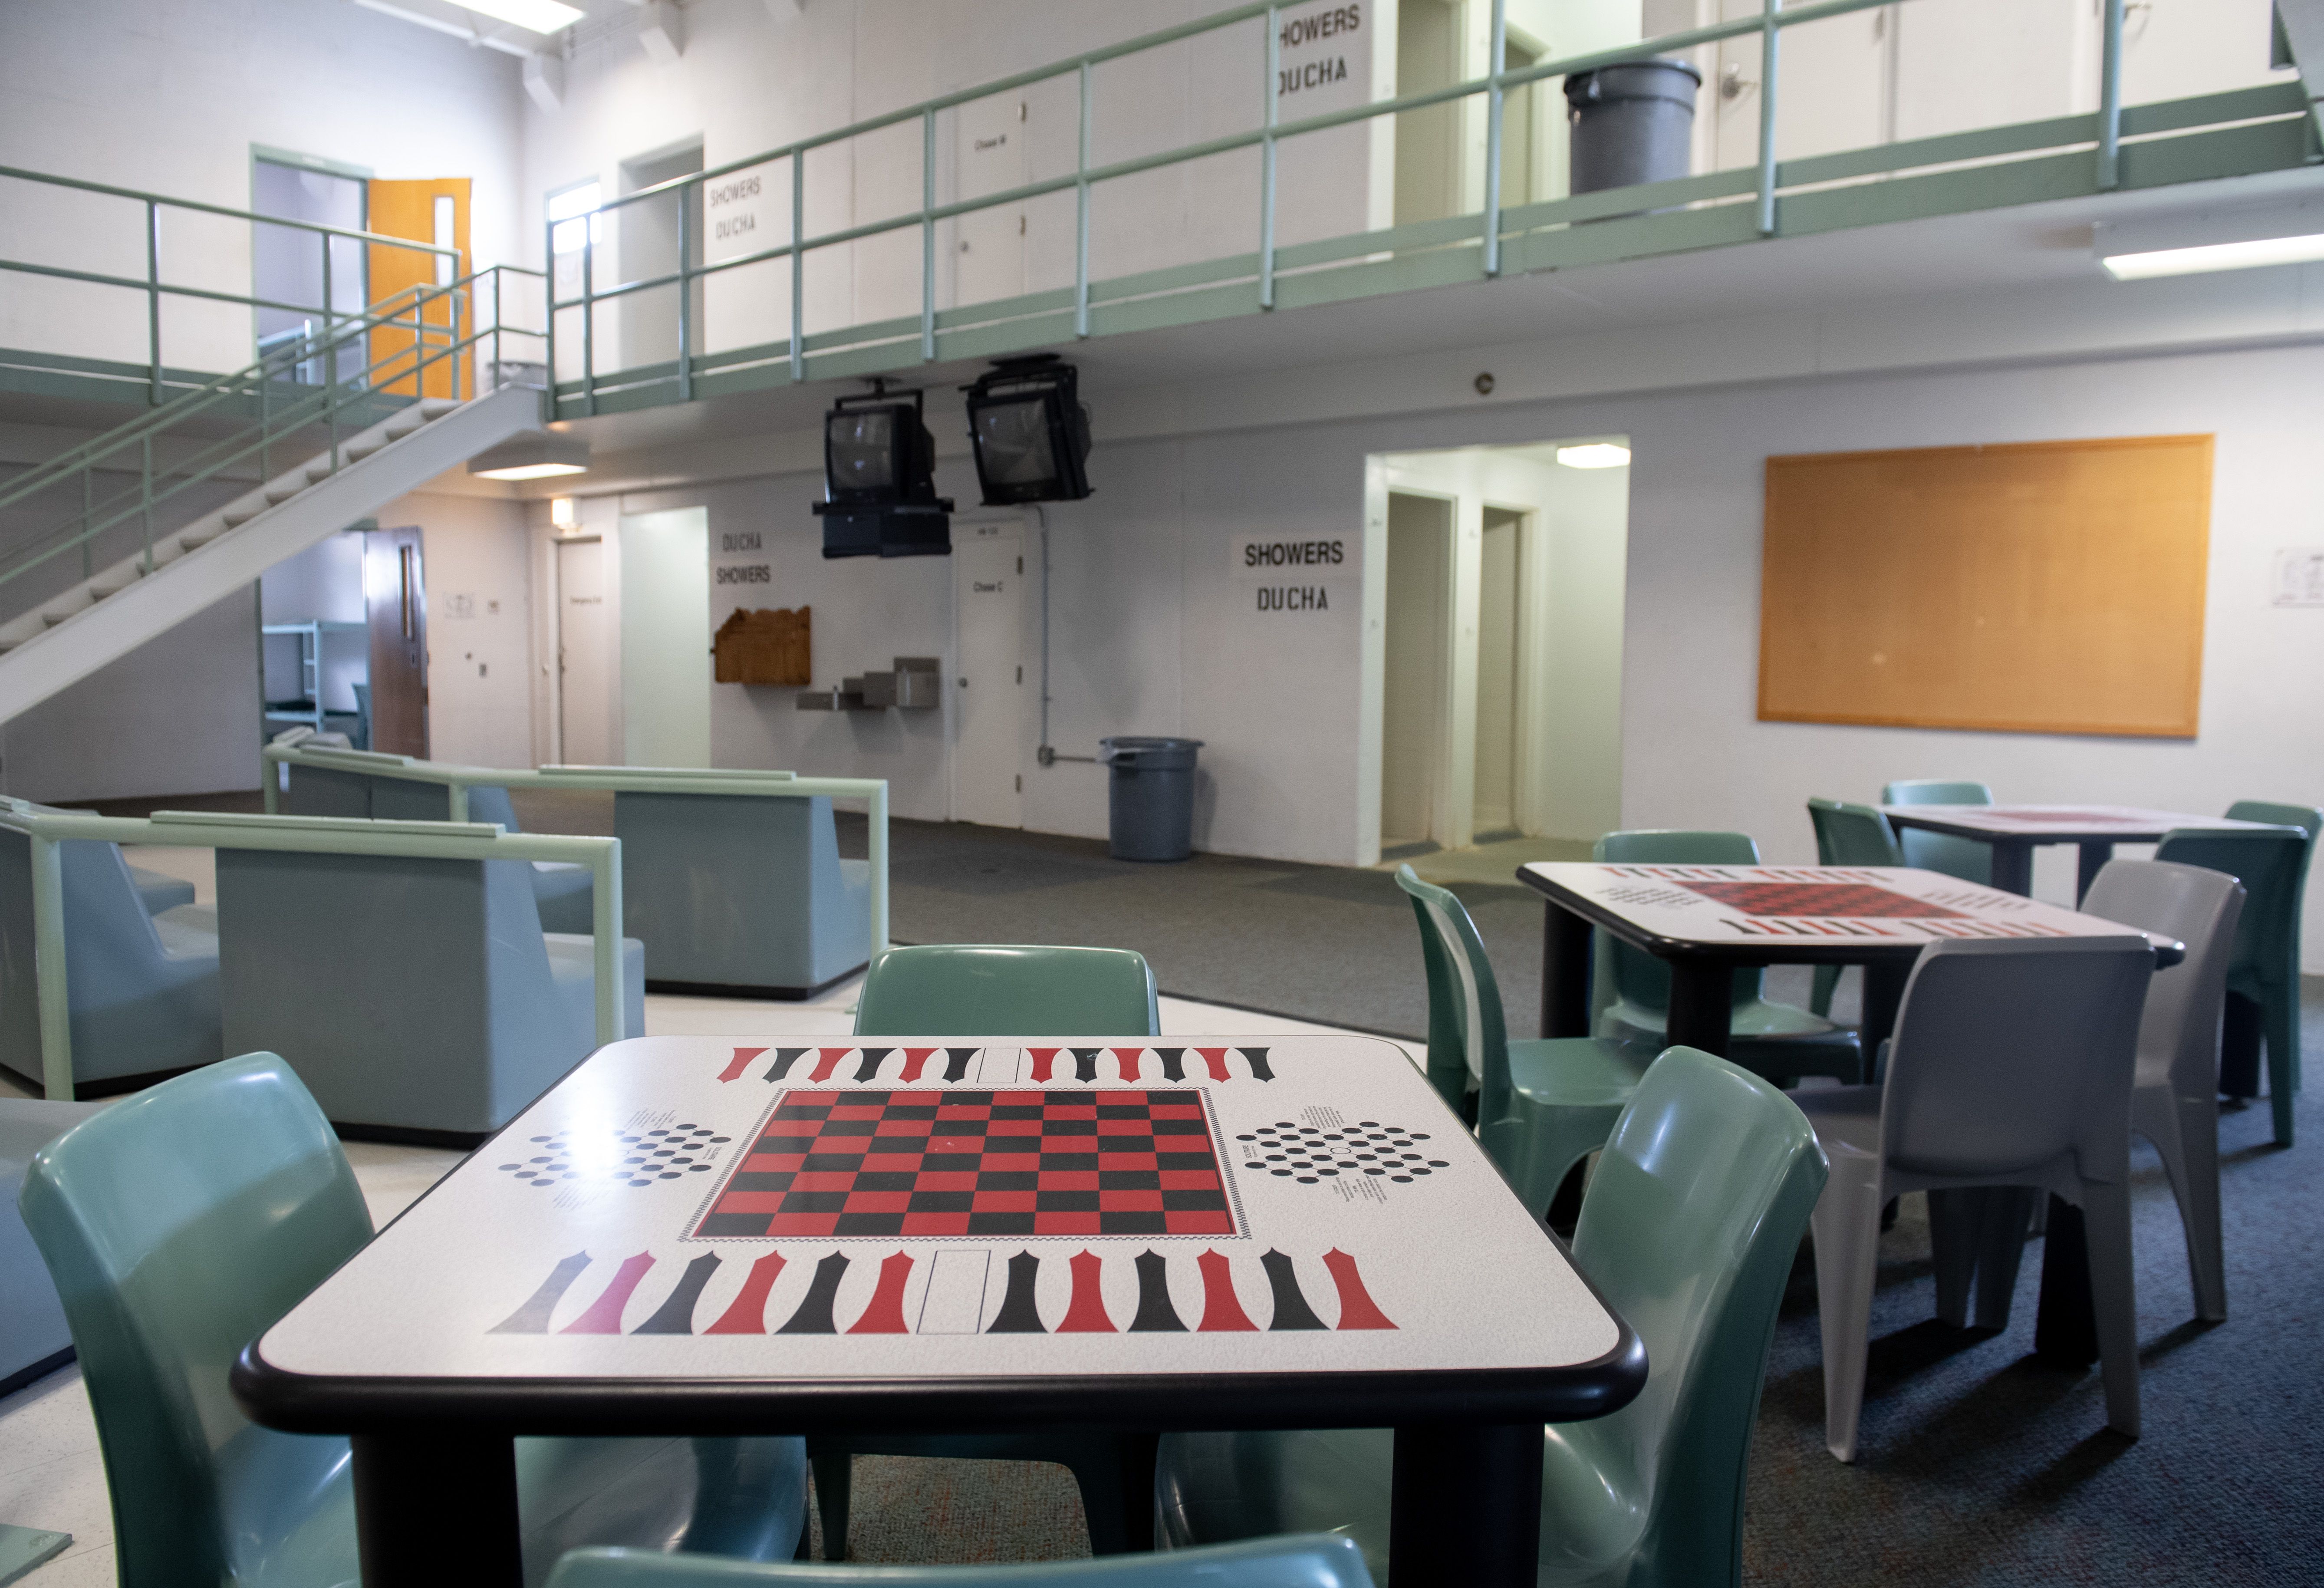 A common area and cell room doors are seen inside ICE's Caroline Detention Facility in Bowling Green, Virginia, on August 13, 2018. (Saul Loeb/AFP/Getty Images)